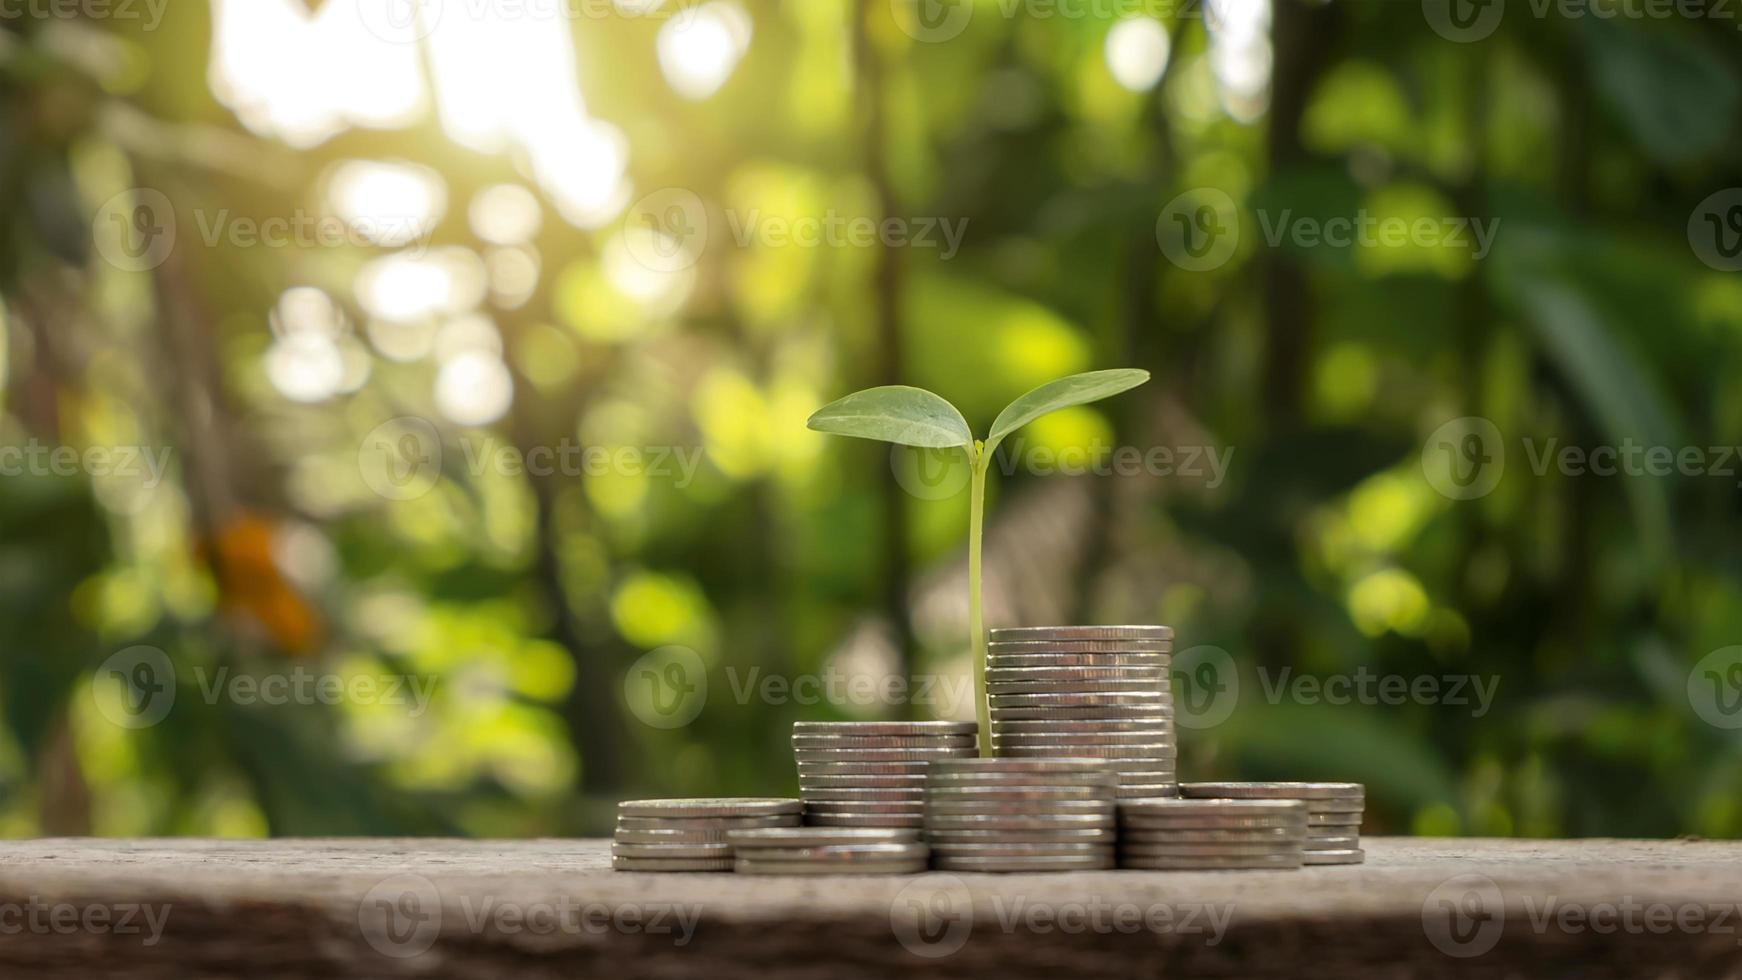 tree growing on pile of coins and green background financial concept financial business investment and economic growth photo